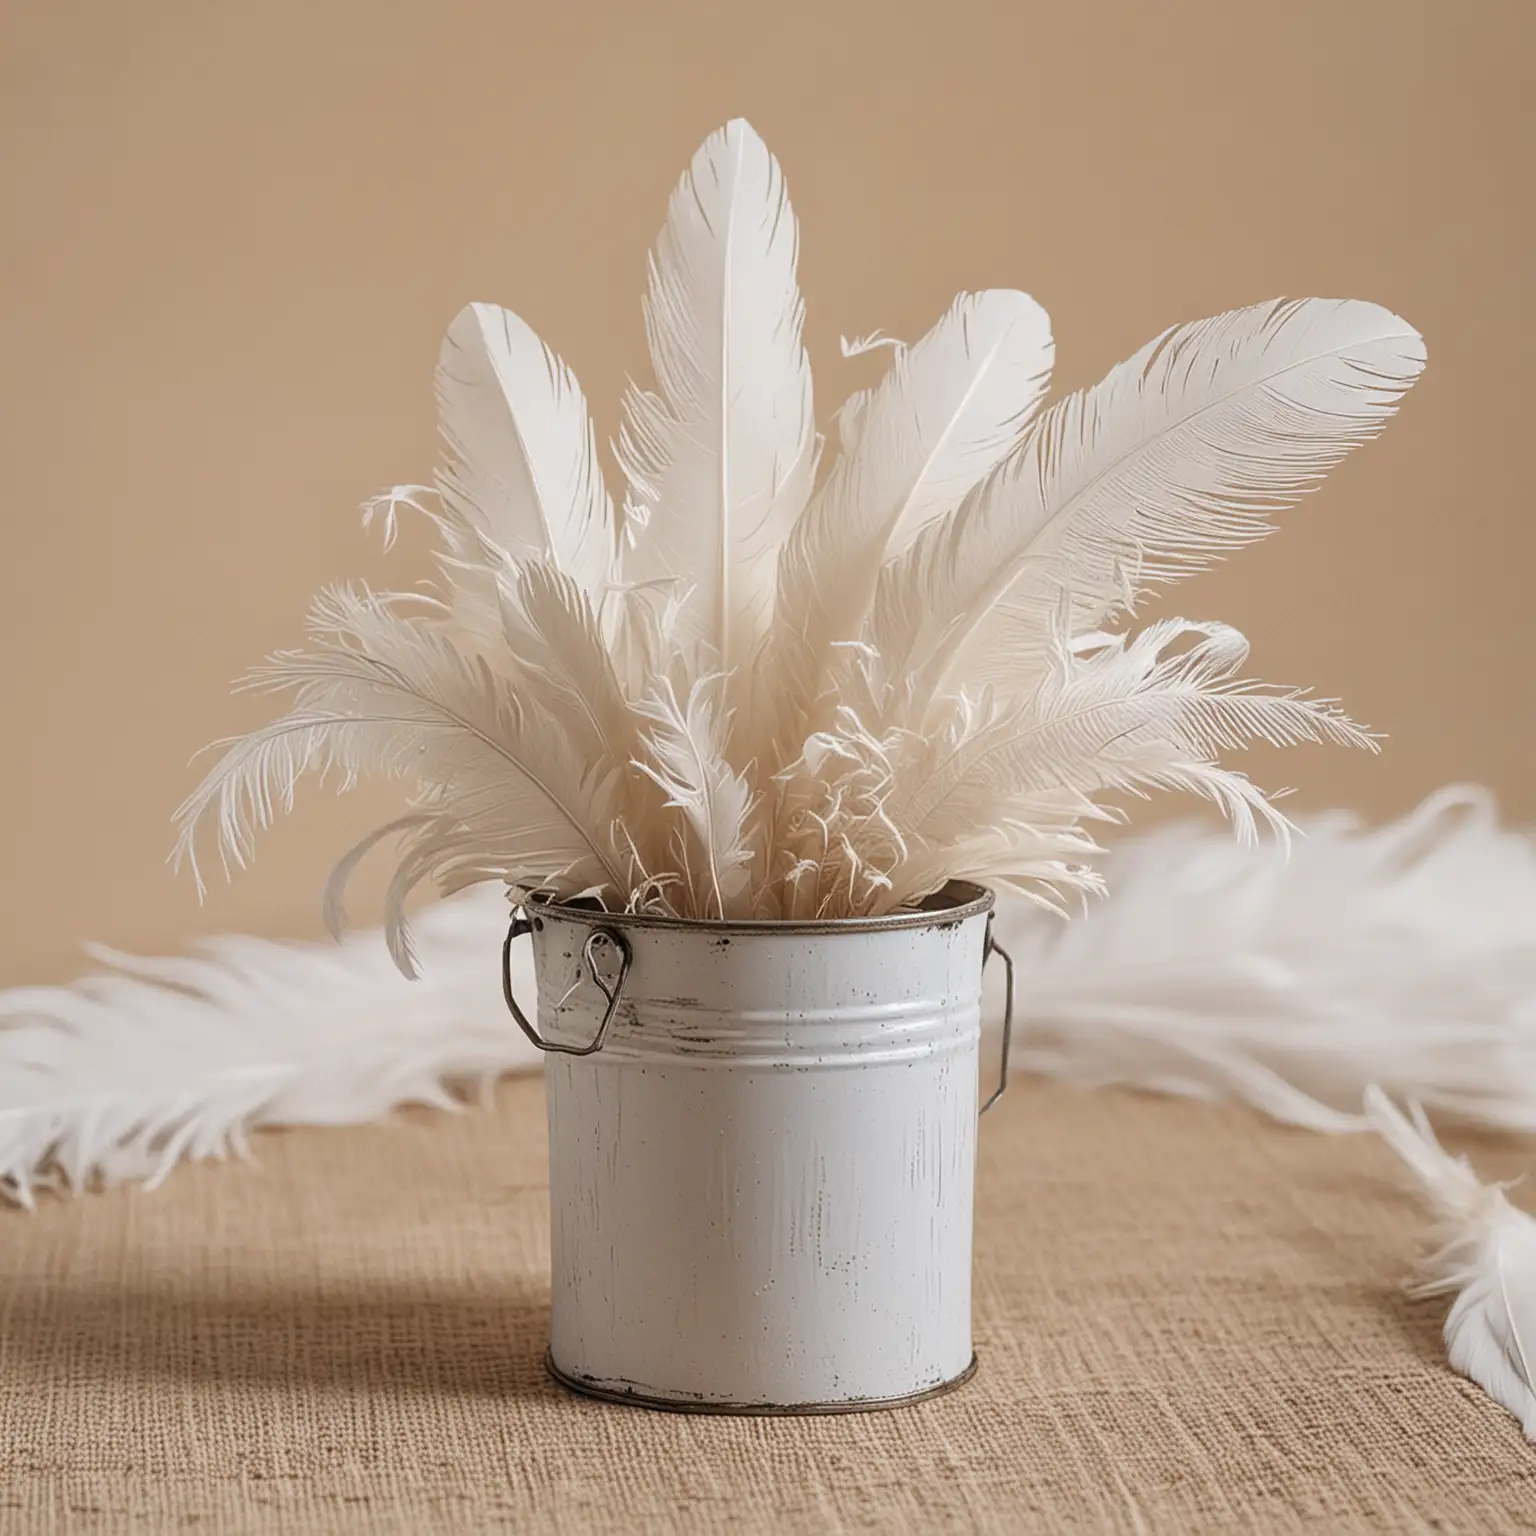 small boho wedding centerpiece with tin pail painted white holding white feathers and with a neutral background